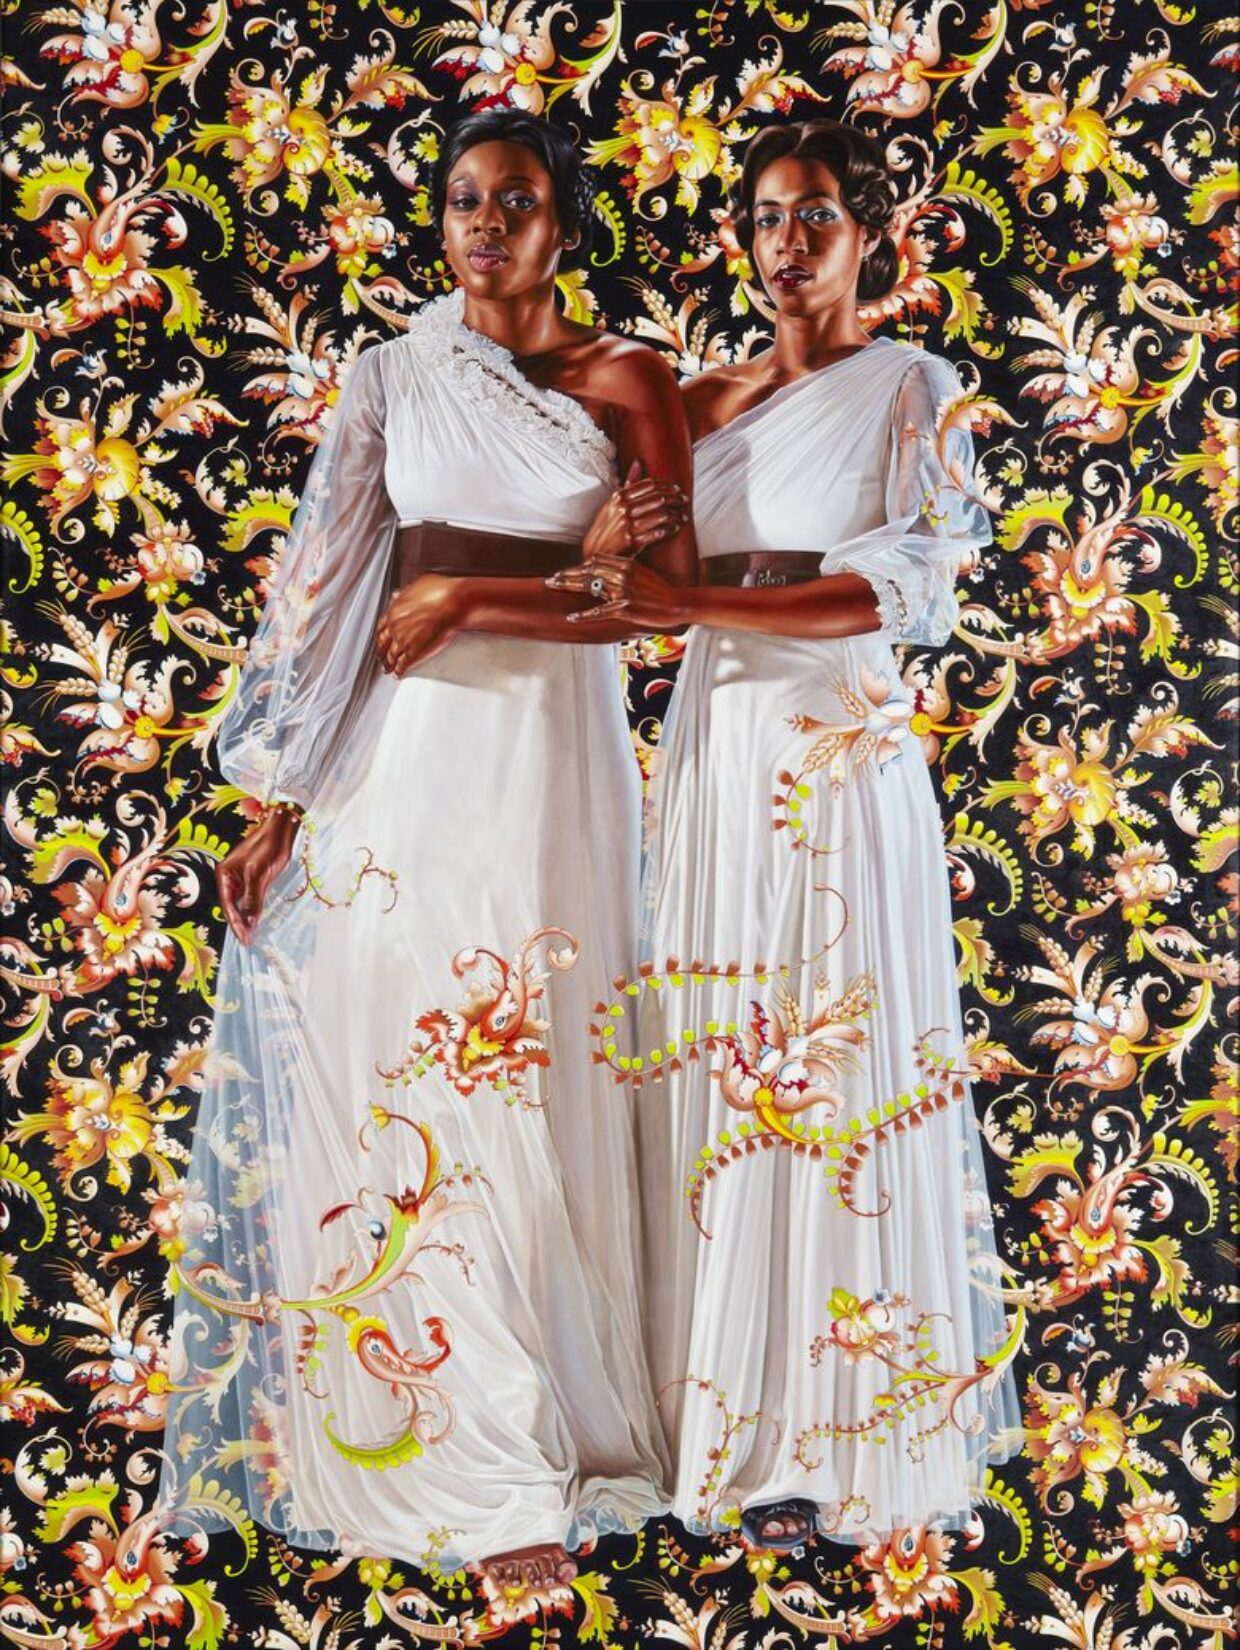 “Kehinde Wiley – A New Republic” exhibition opens Saturday at VMFA | 3